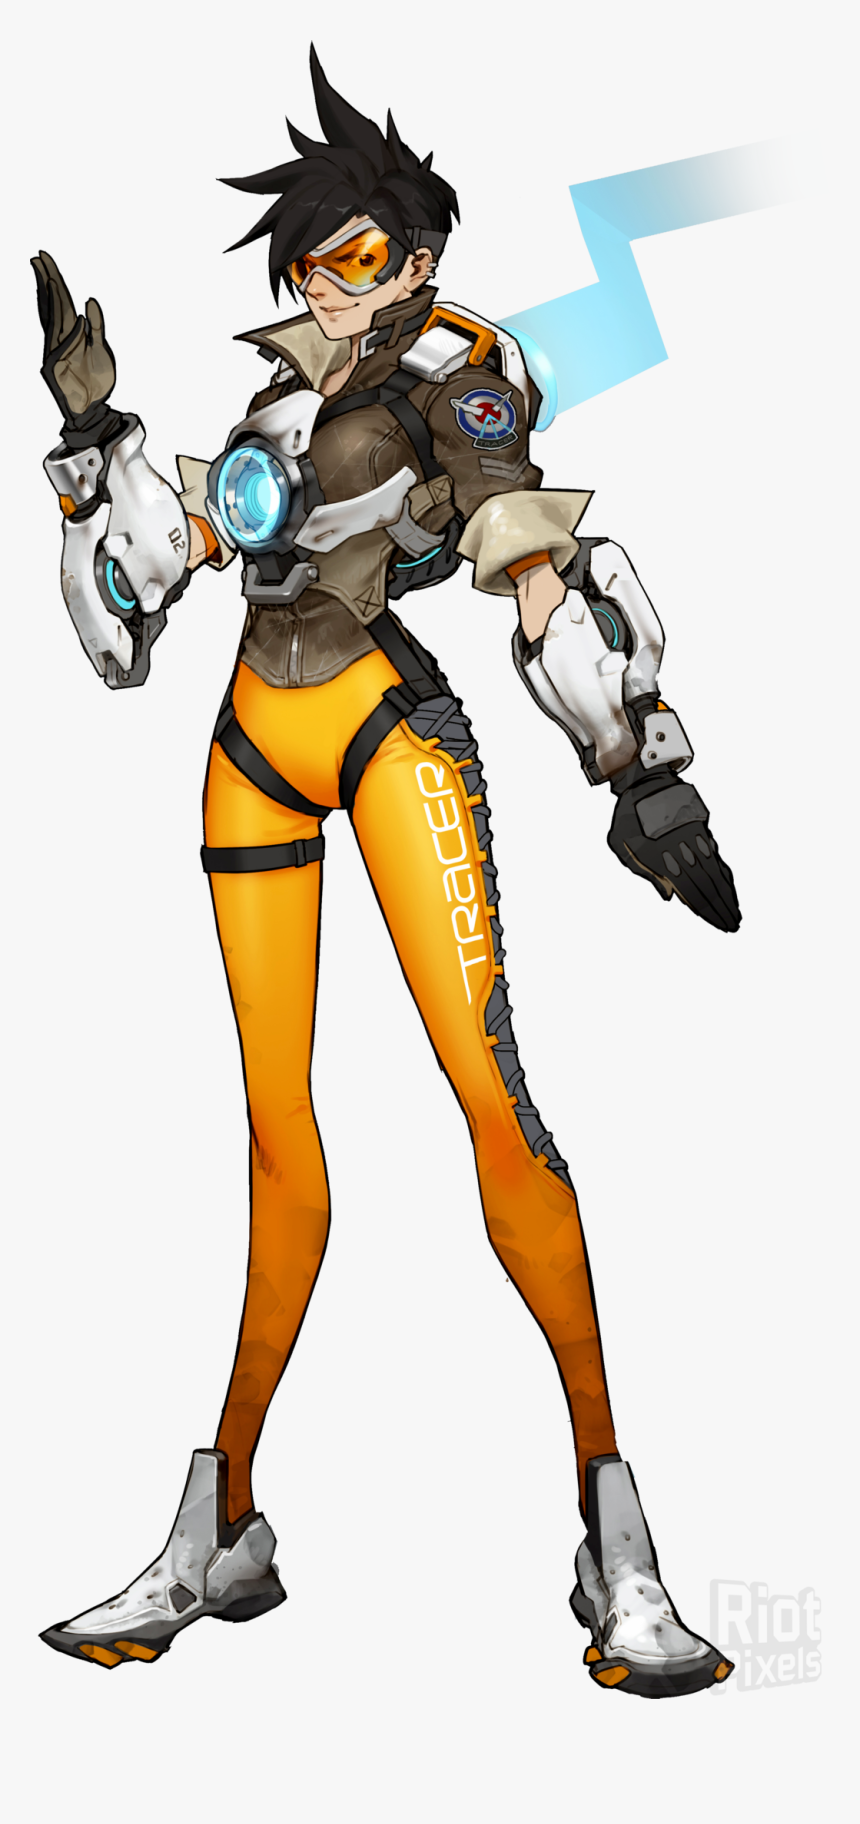 Overwatch Gif Png, Transparent Png, Free Download